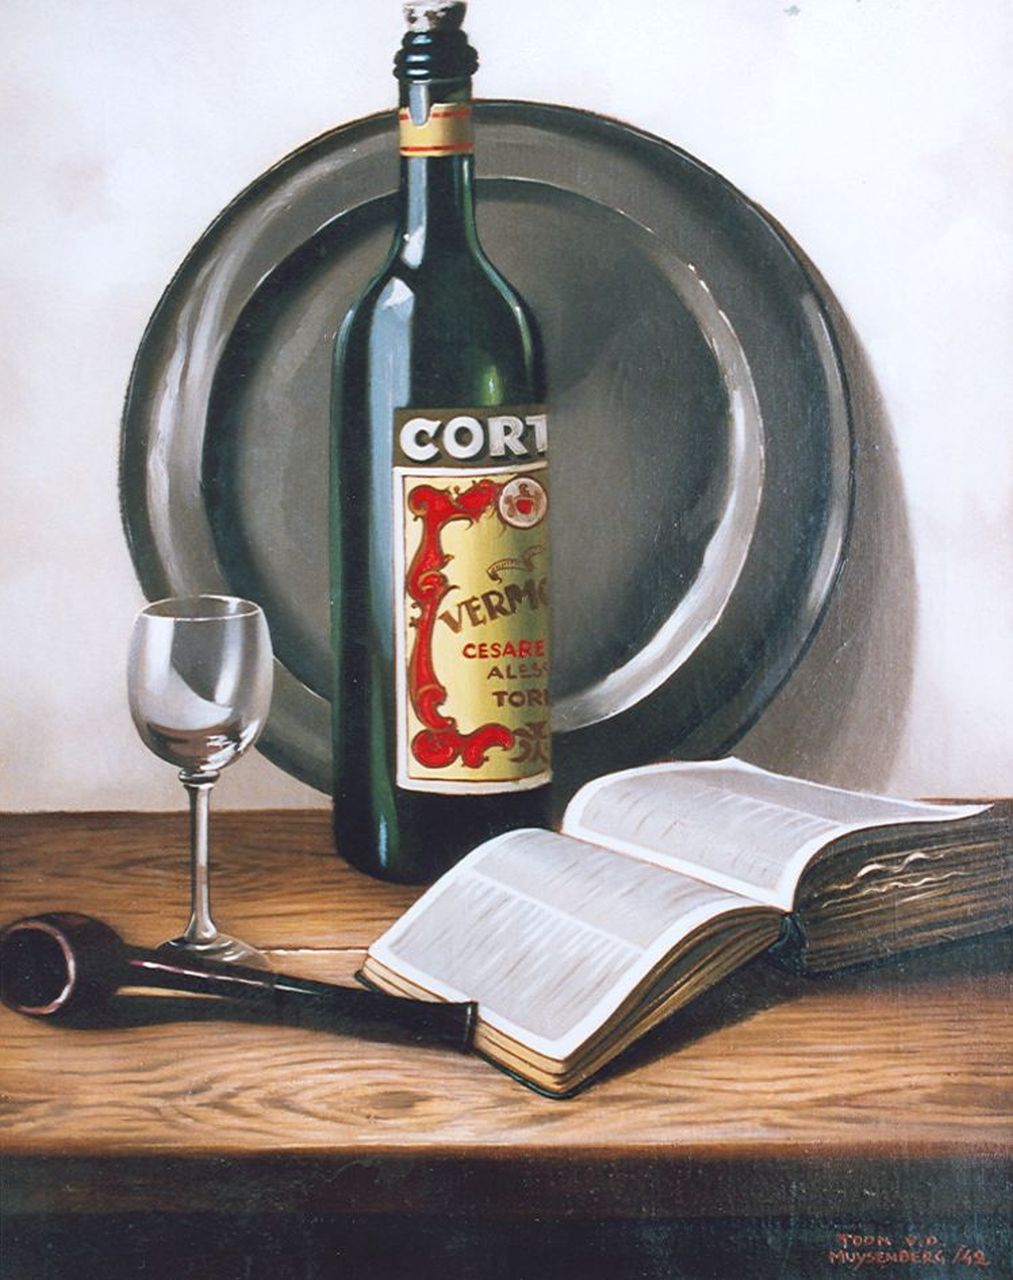 Muysenberg A.A.F. van den | Antonius Adrianus Franciscus 'Toon' van den Muysenberg, Still life with a vermouth bottle, oil on canvas 50.2 x 40.0 cm, signed l.r. and dated '42